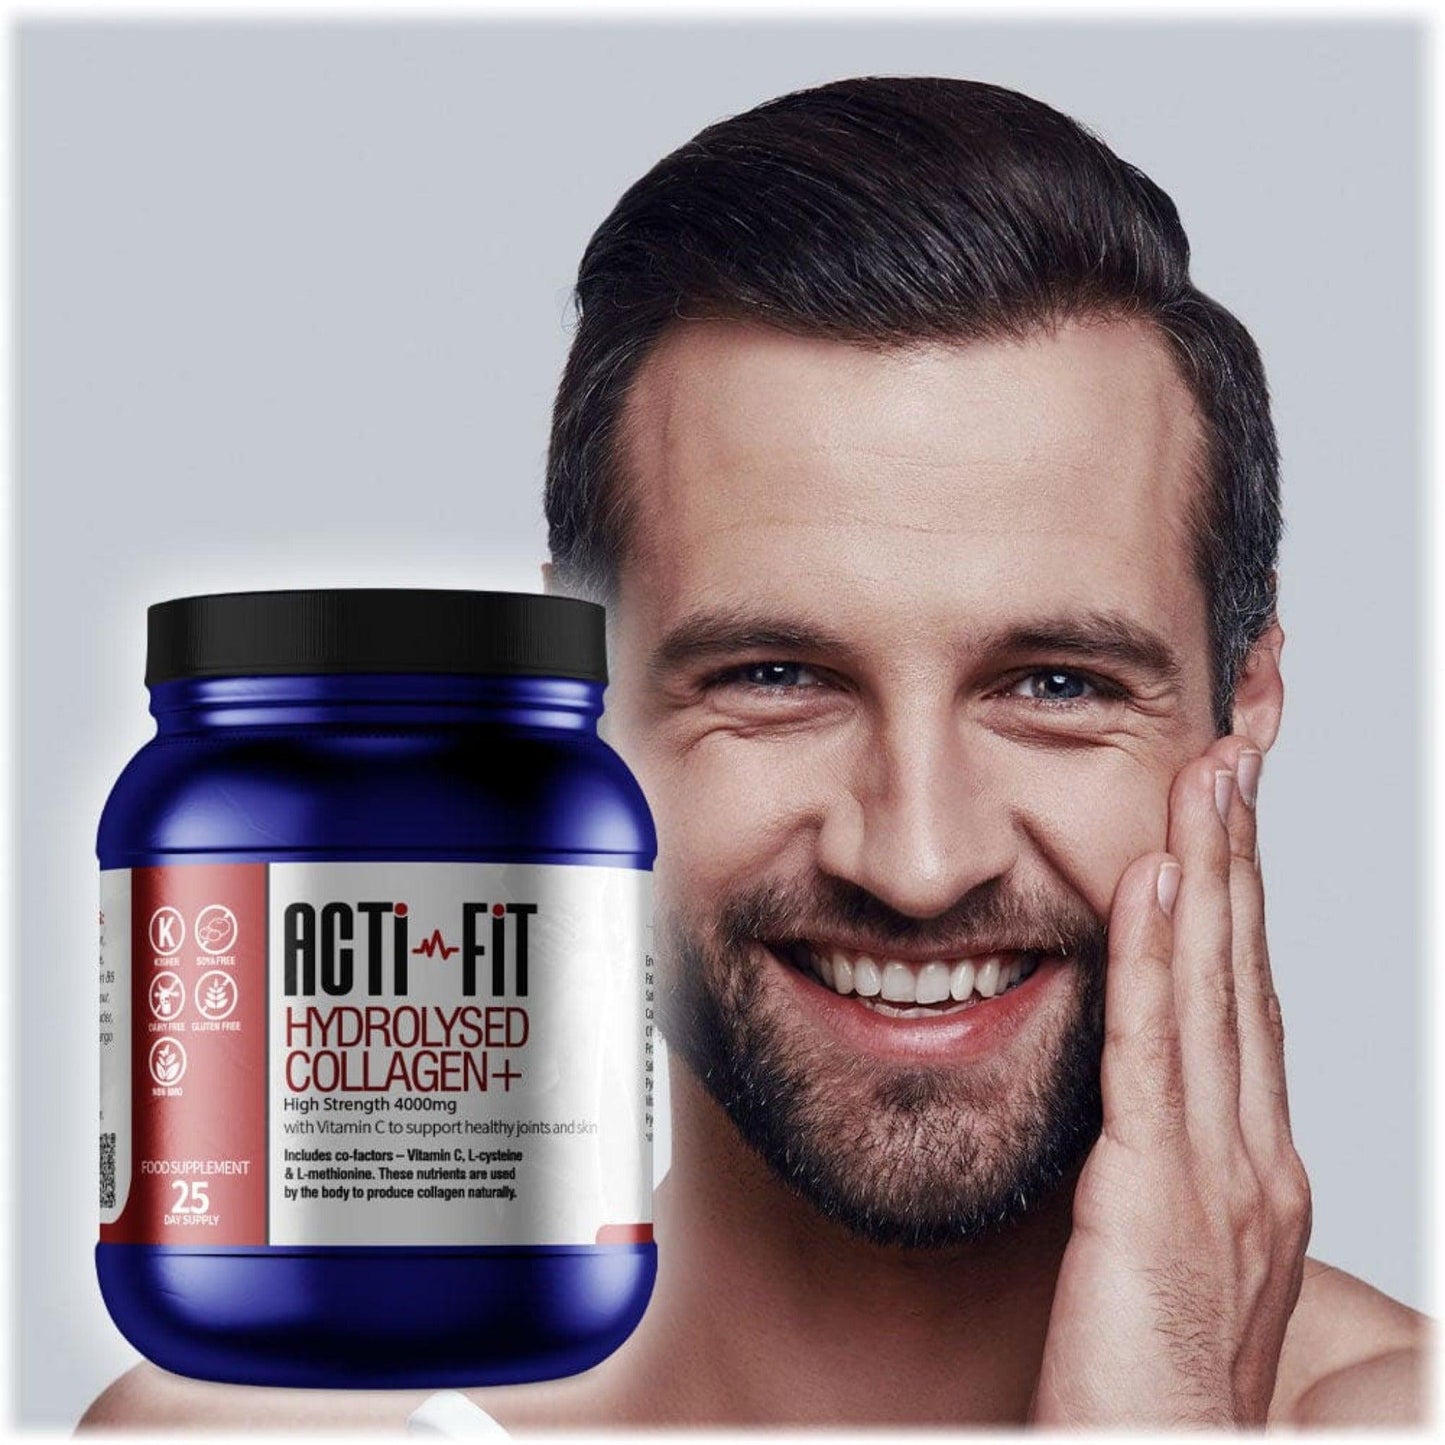 A man smiling holding his face with a tub of Acti-Fit Hydrolysed Collagen 4000mg High Strength in the foreground